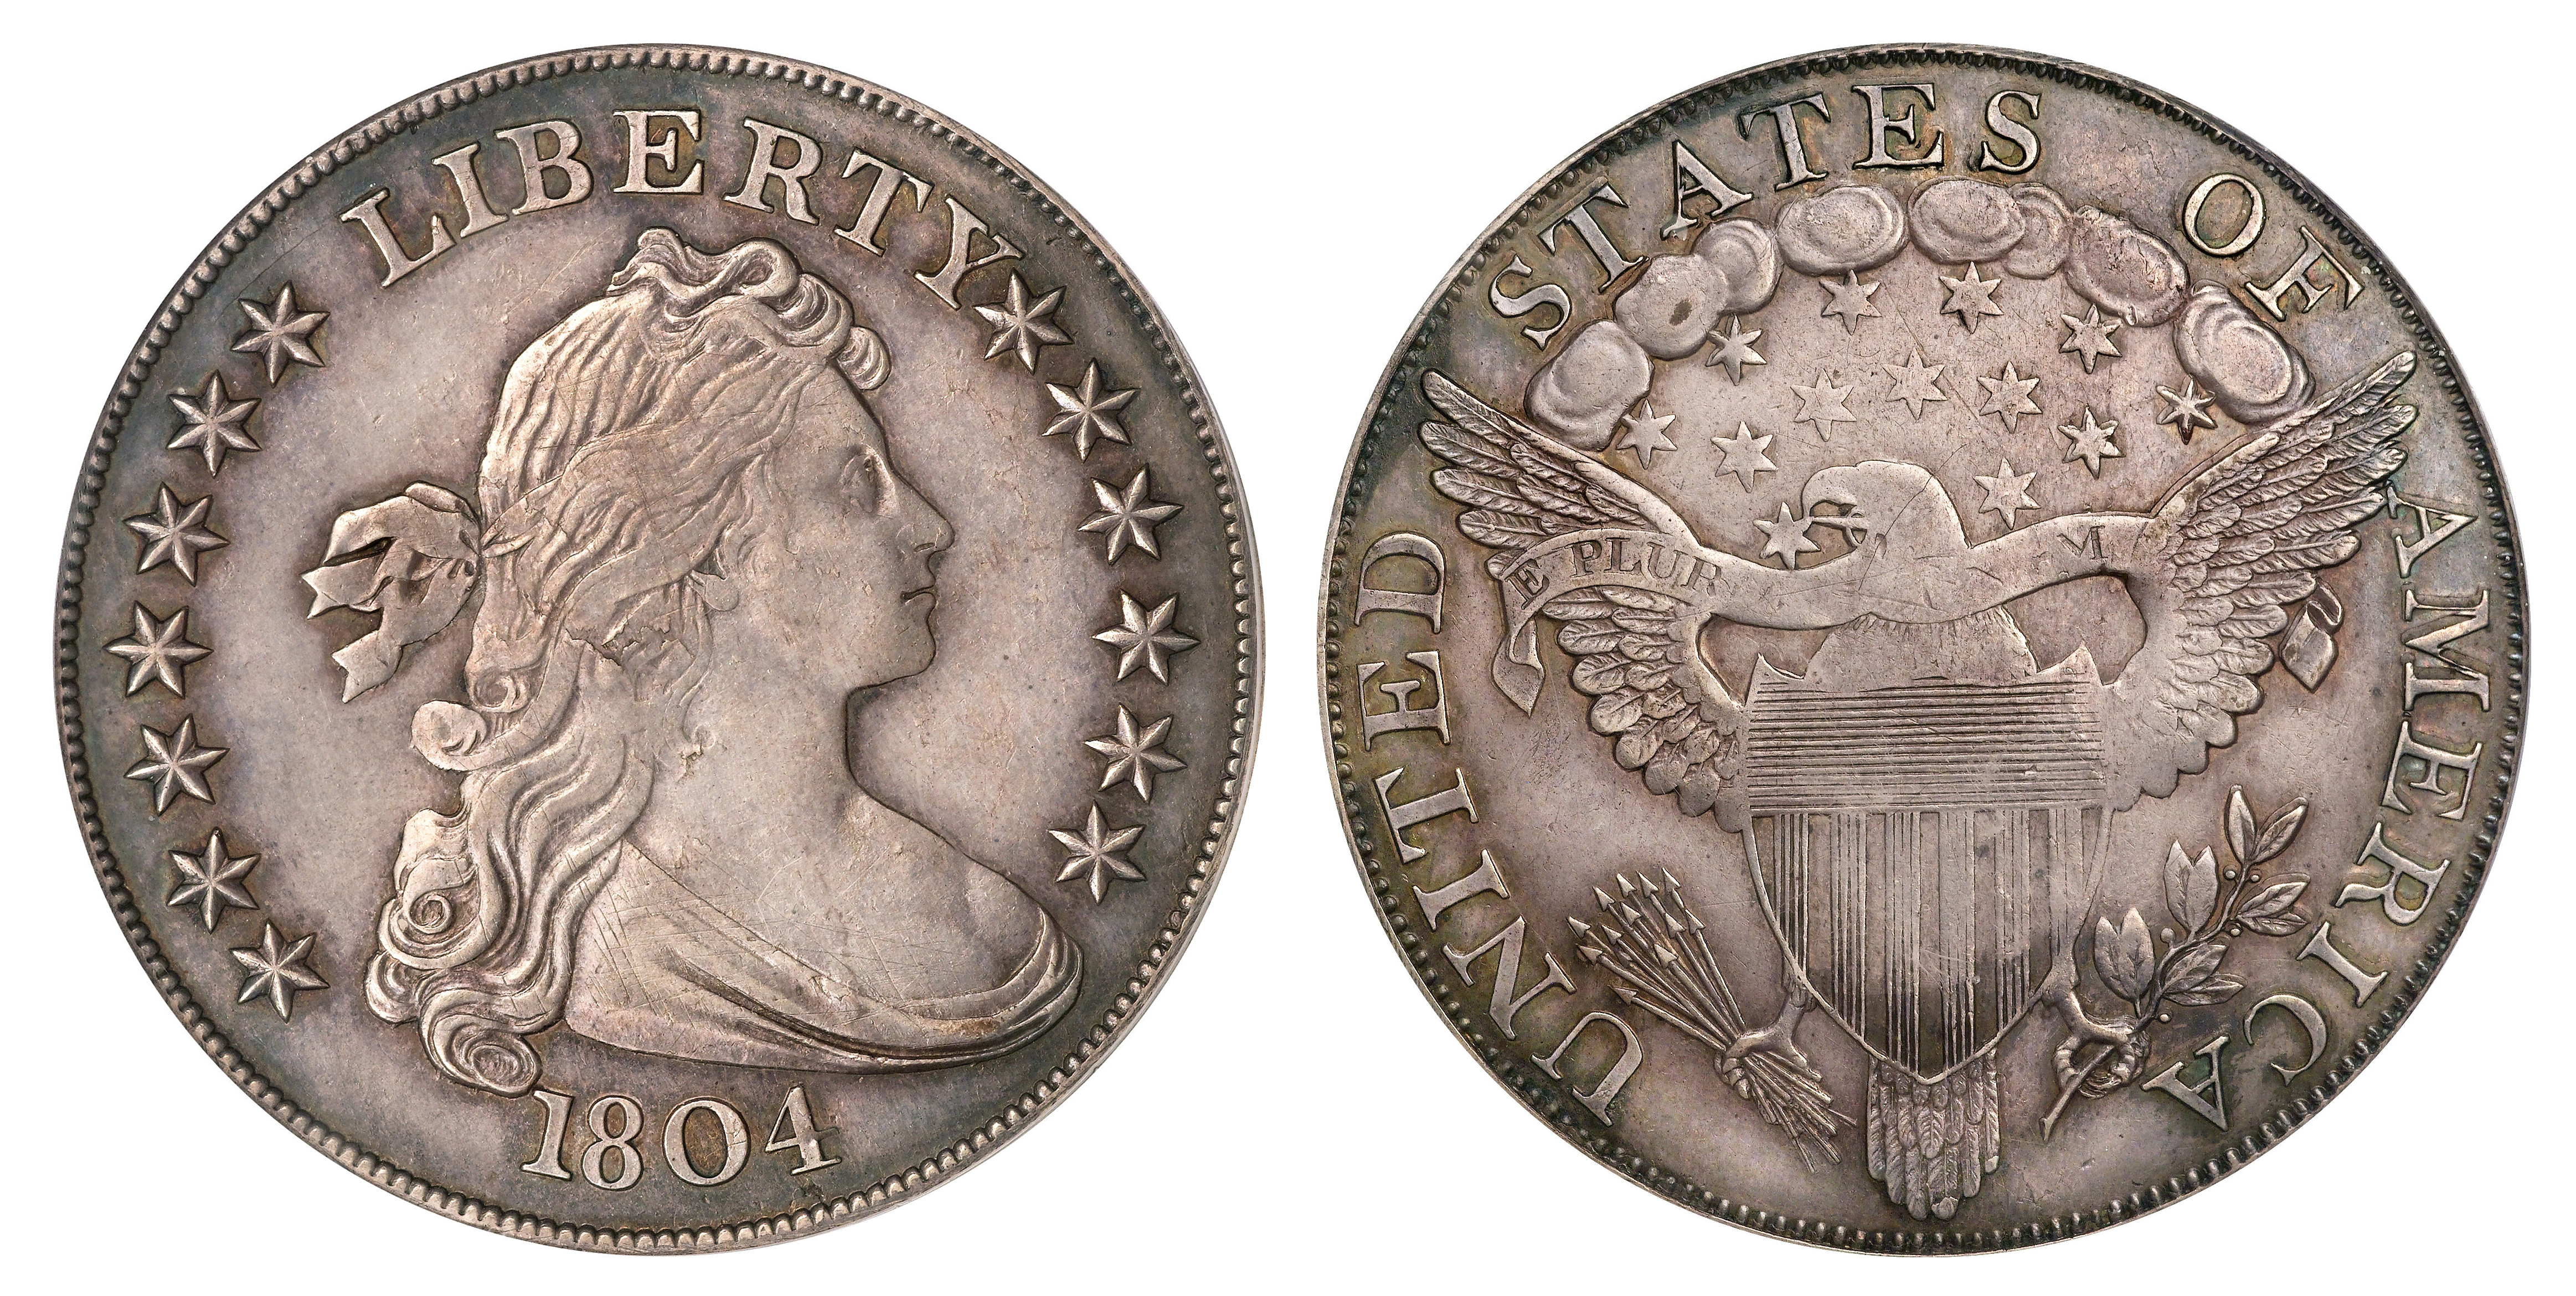 Rare silver dollar sells for $3,202 - do you have the coin or